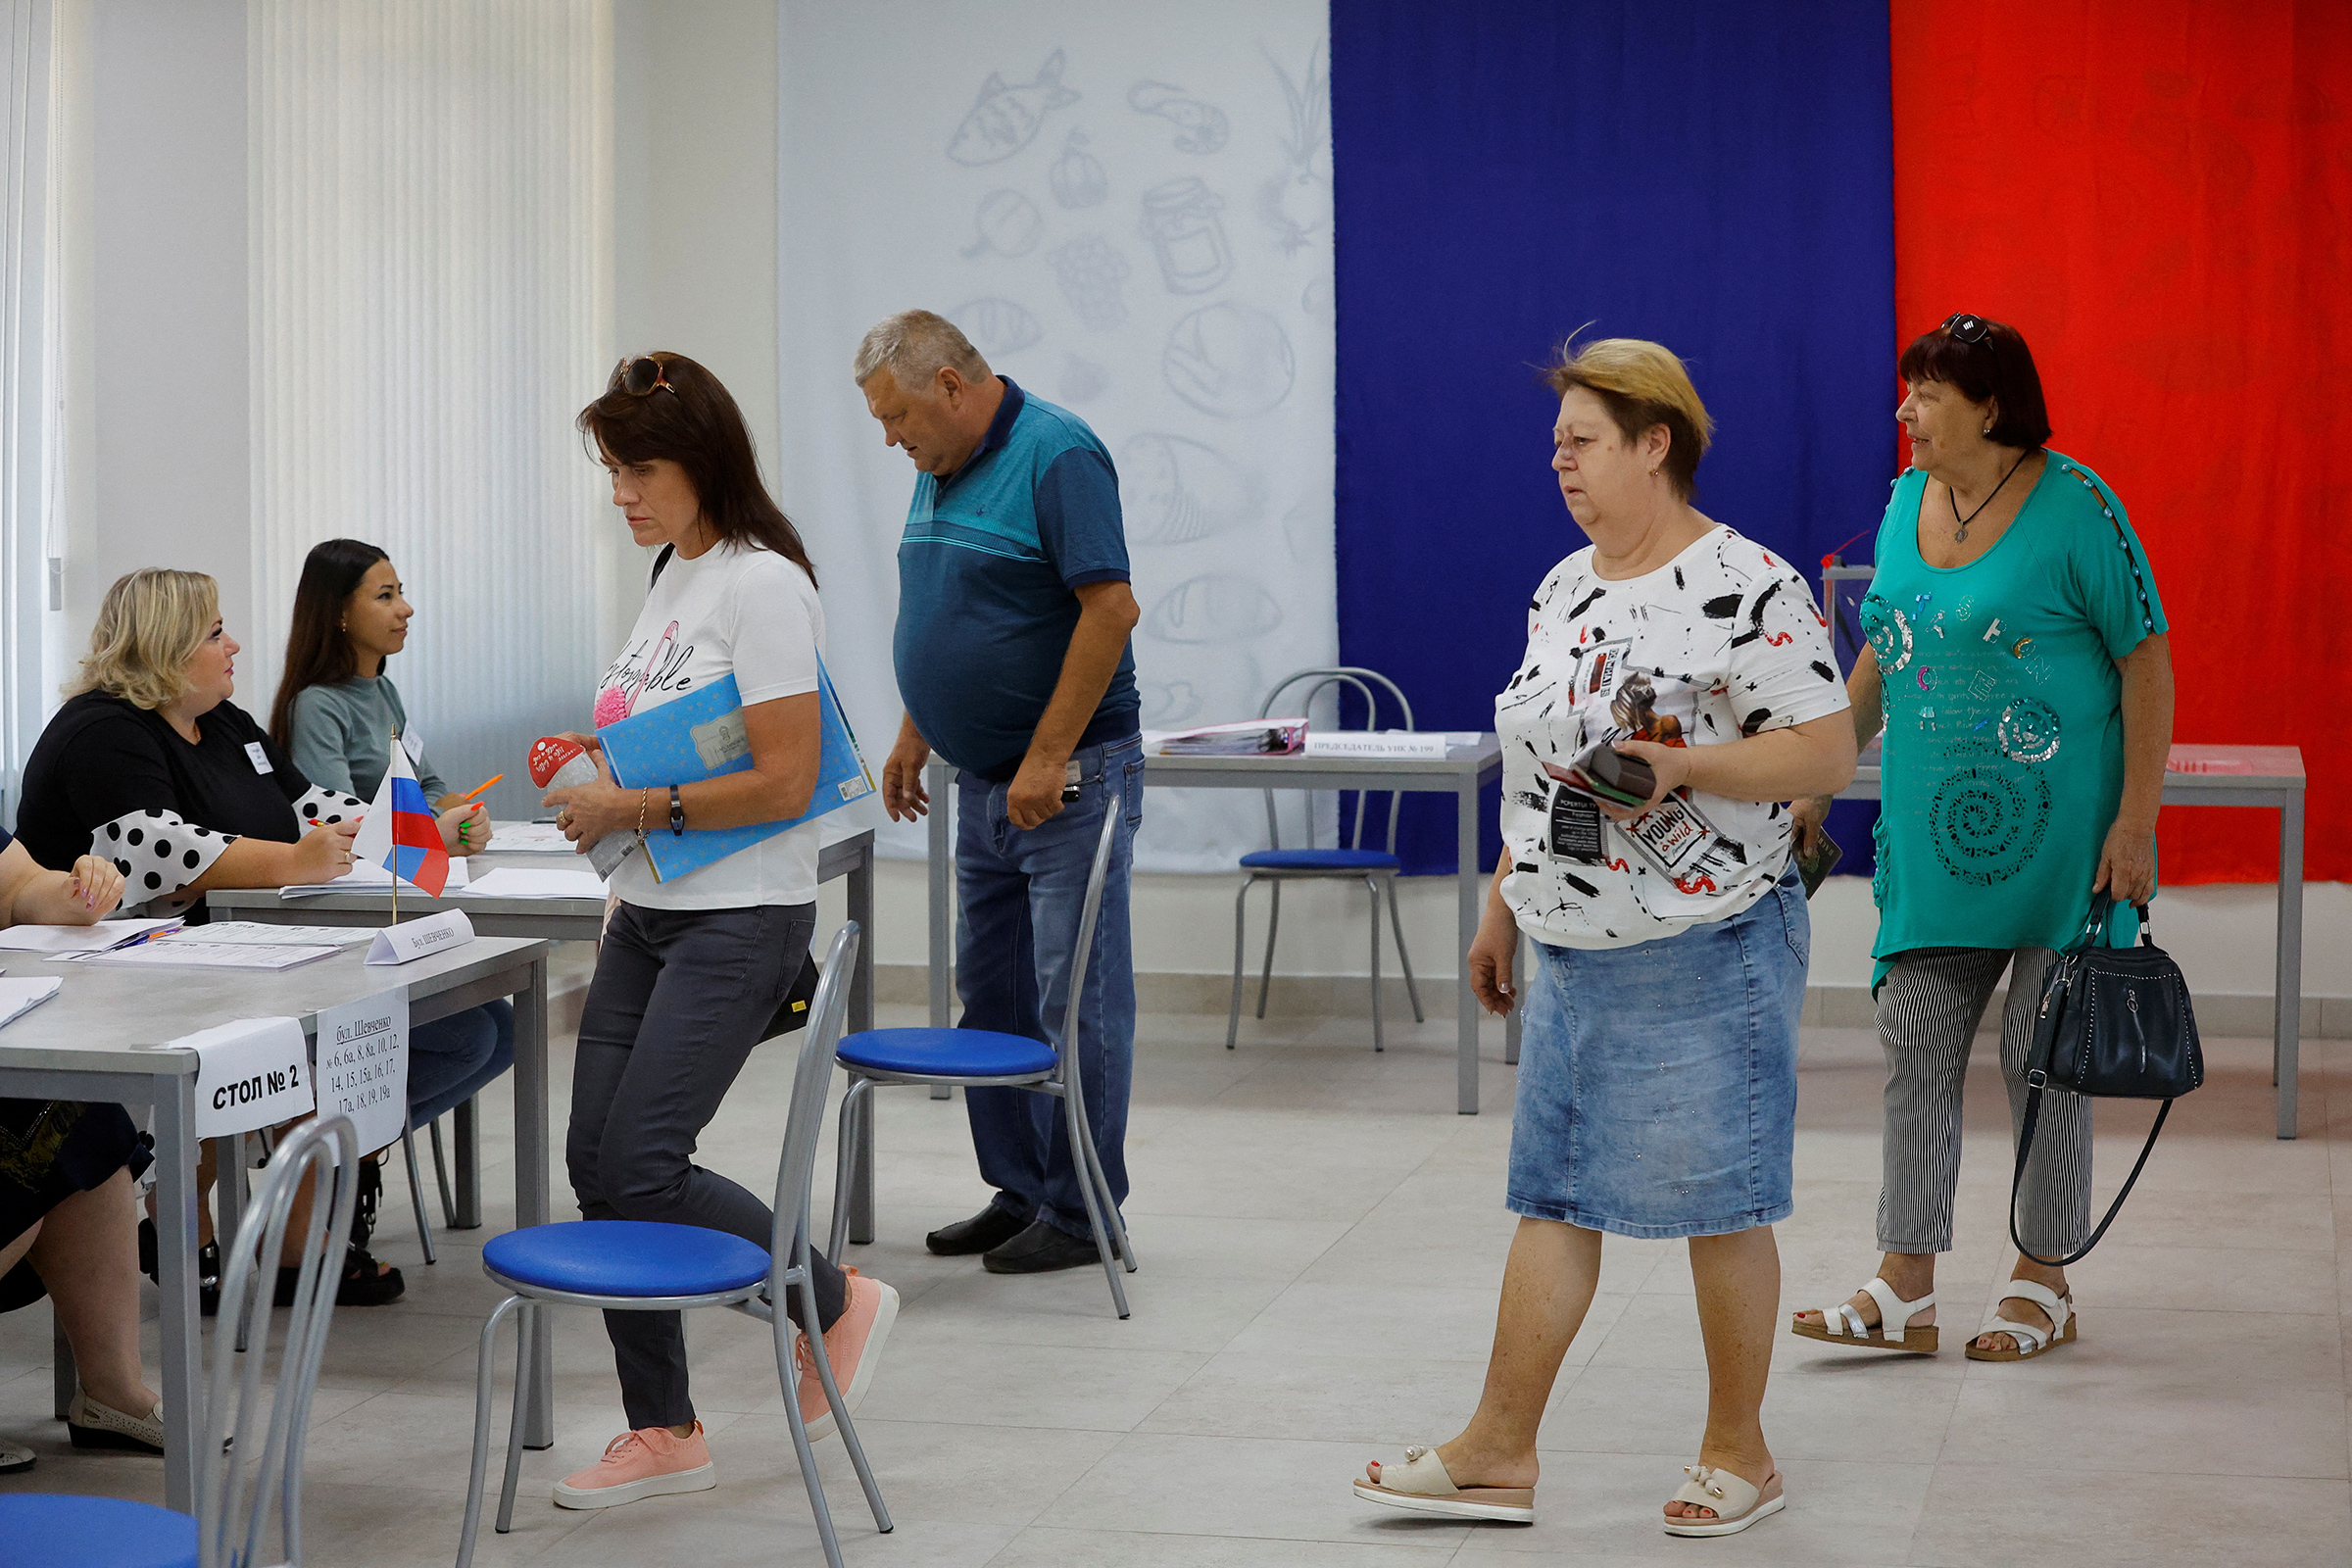 Voters walk toward members of an electoral commission to receive their ballots at a polling station during local elections held by the Russian-installed authorities in Donetsk, on Sept. 8.  (Alexander Ermochenko—Reuters)